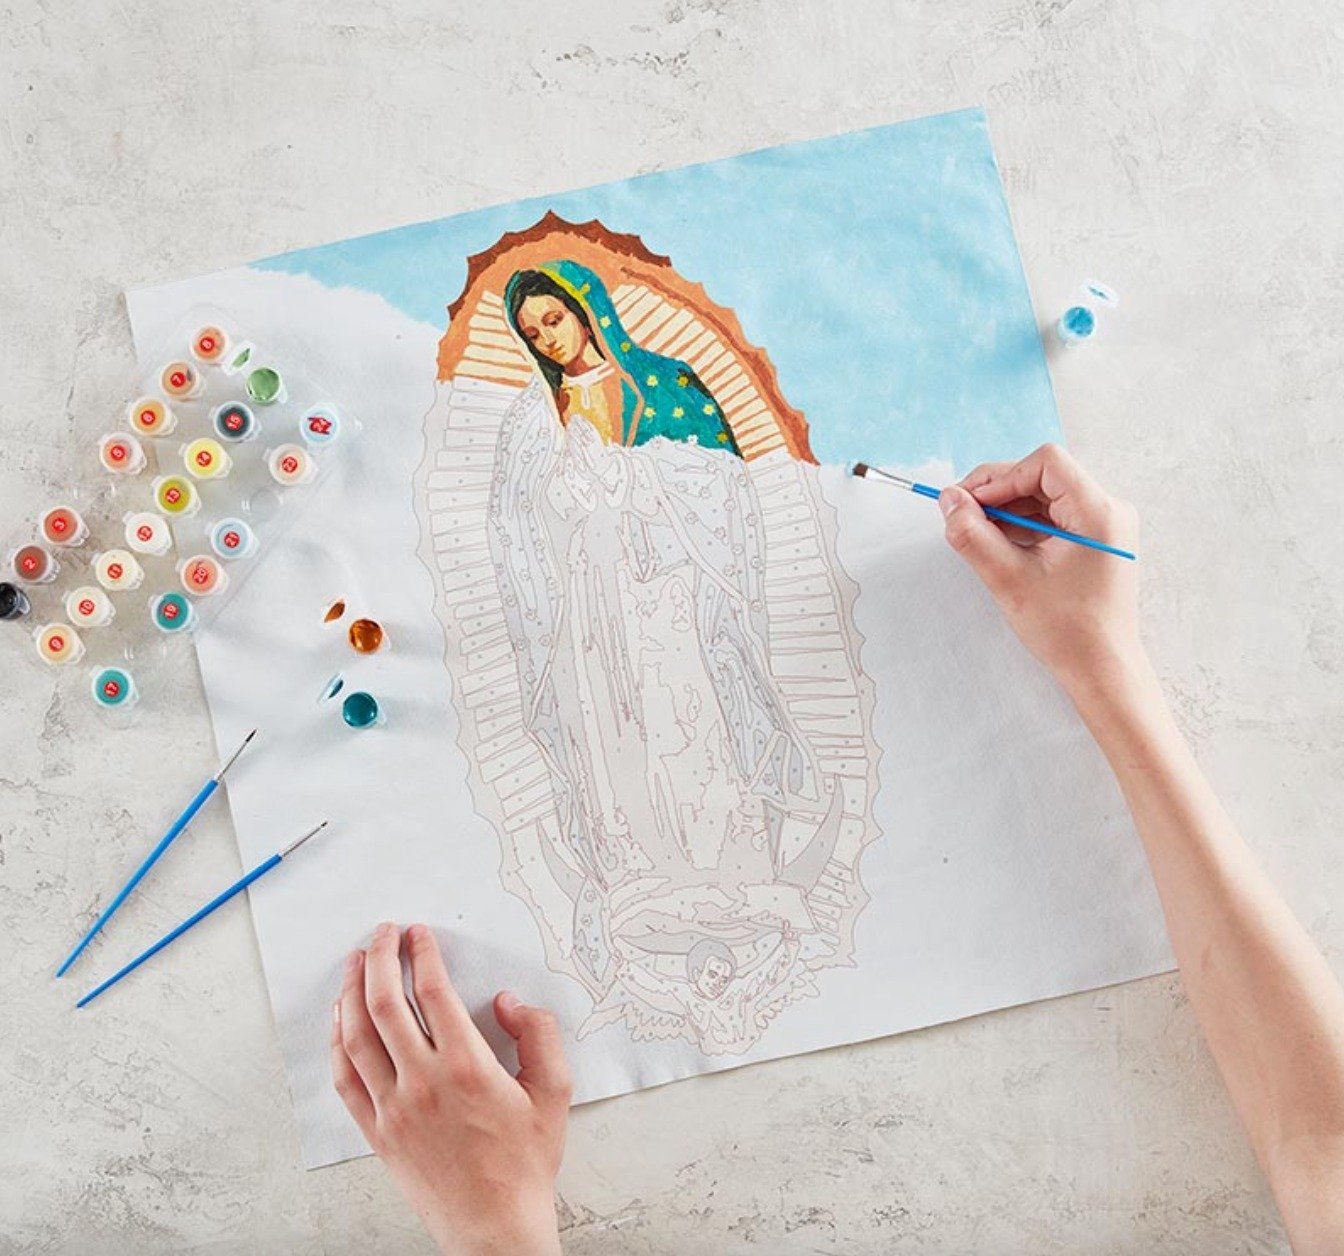 Fascinating facts about Our Lady of Guadalupe:

1) Many aren't aware that the original Guadalupe is from Extremadura, Spain.
2) Prior to Guadalupe's alleged appearance in 1531, an Aztec goddess had been worshipped at the same site.
3) The color in Ma